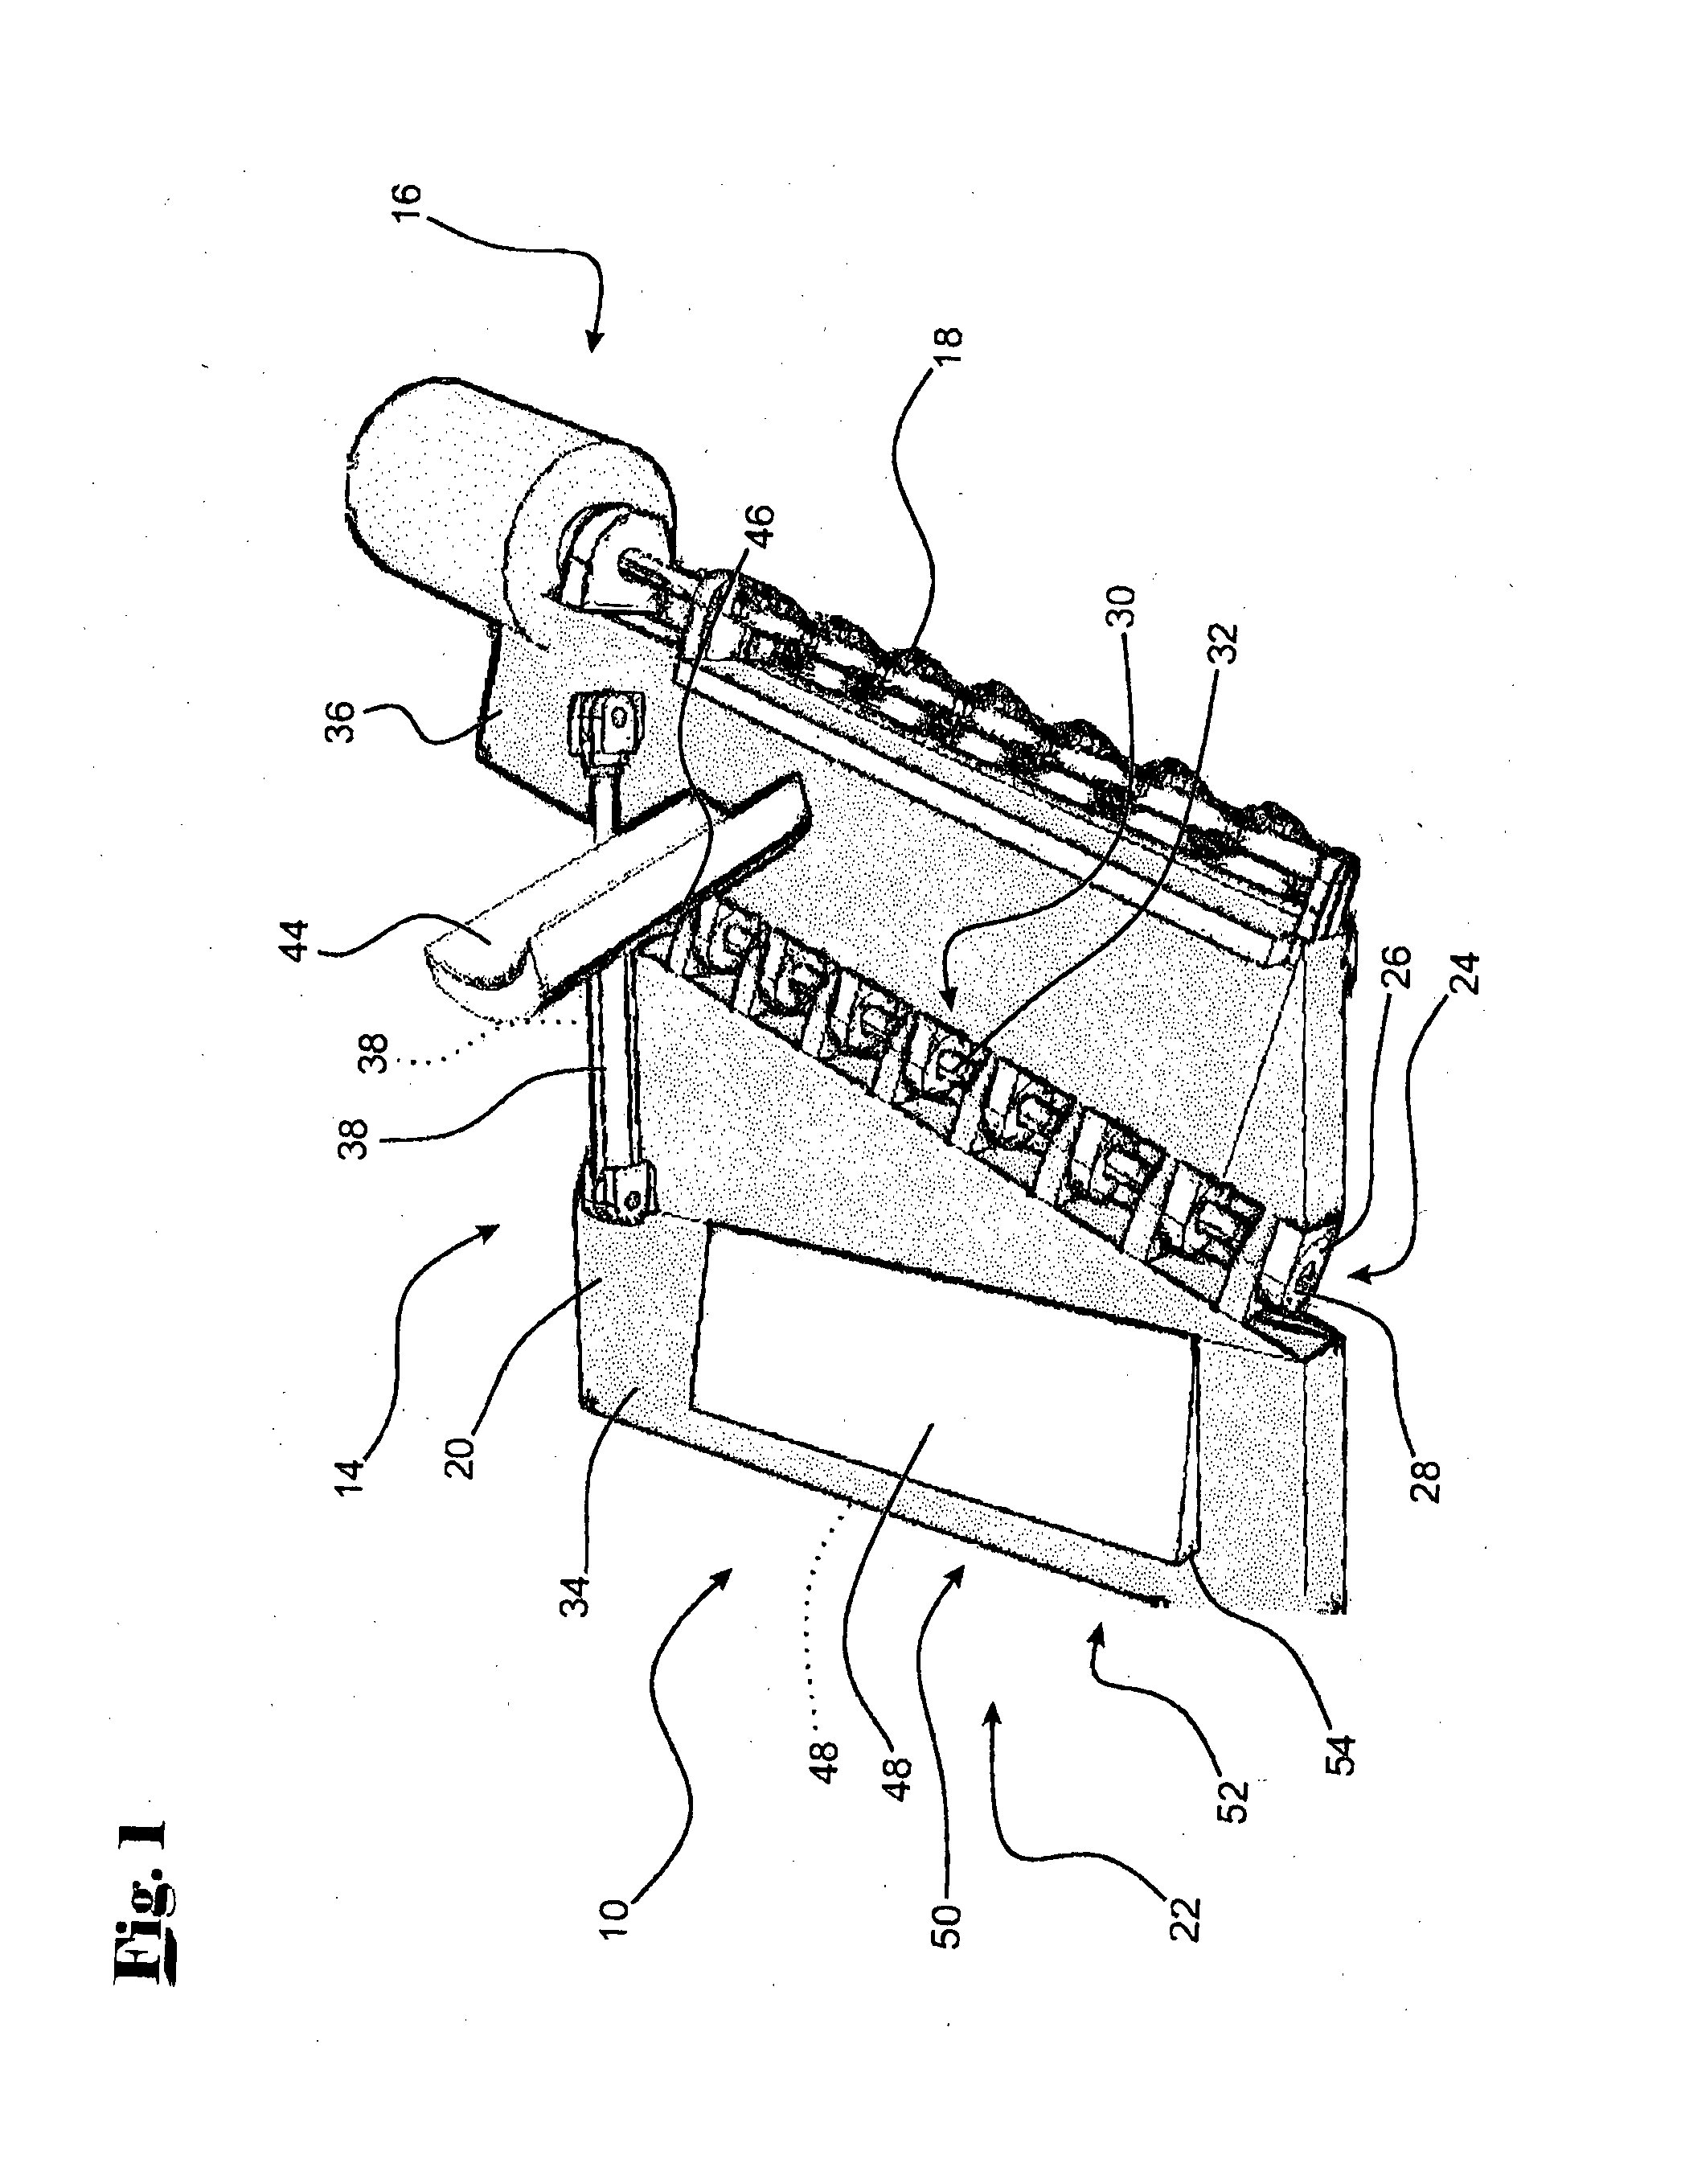 Excavation devices and methods